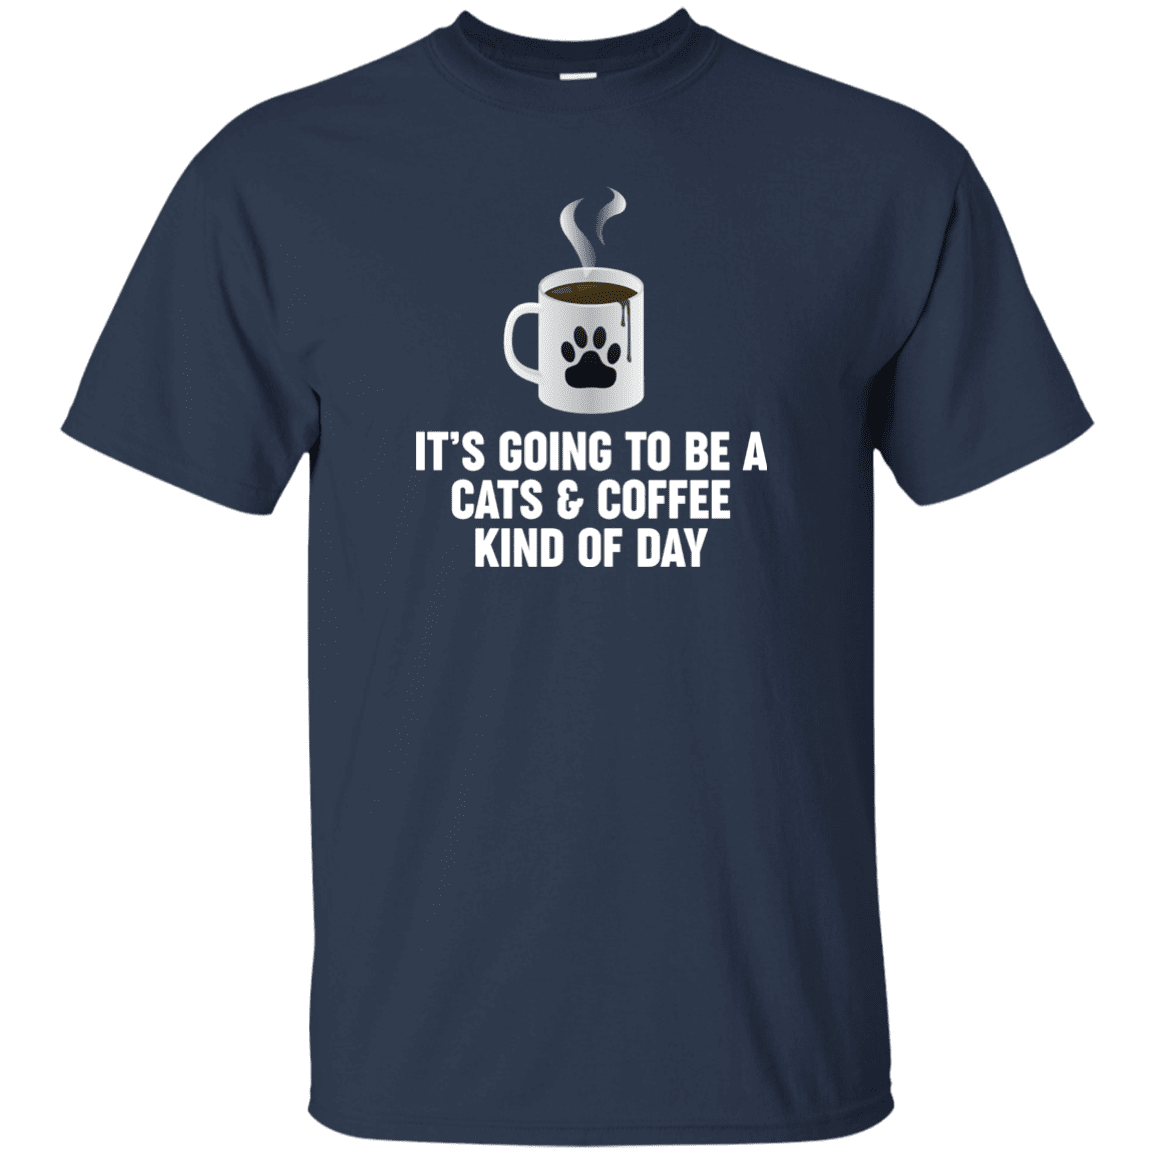 Cats And Coffee - T Shirt.